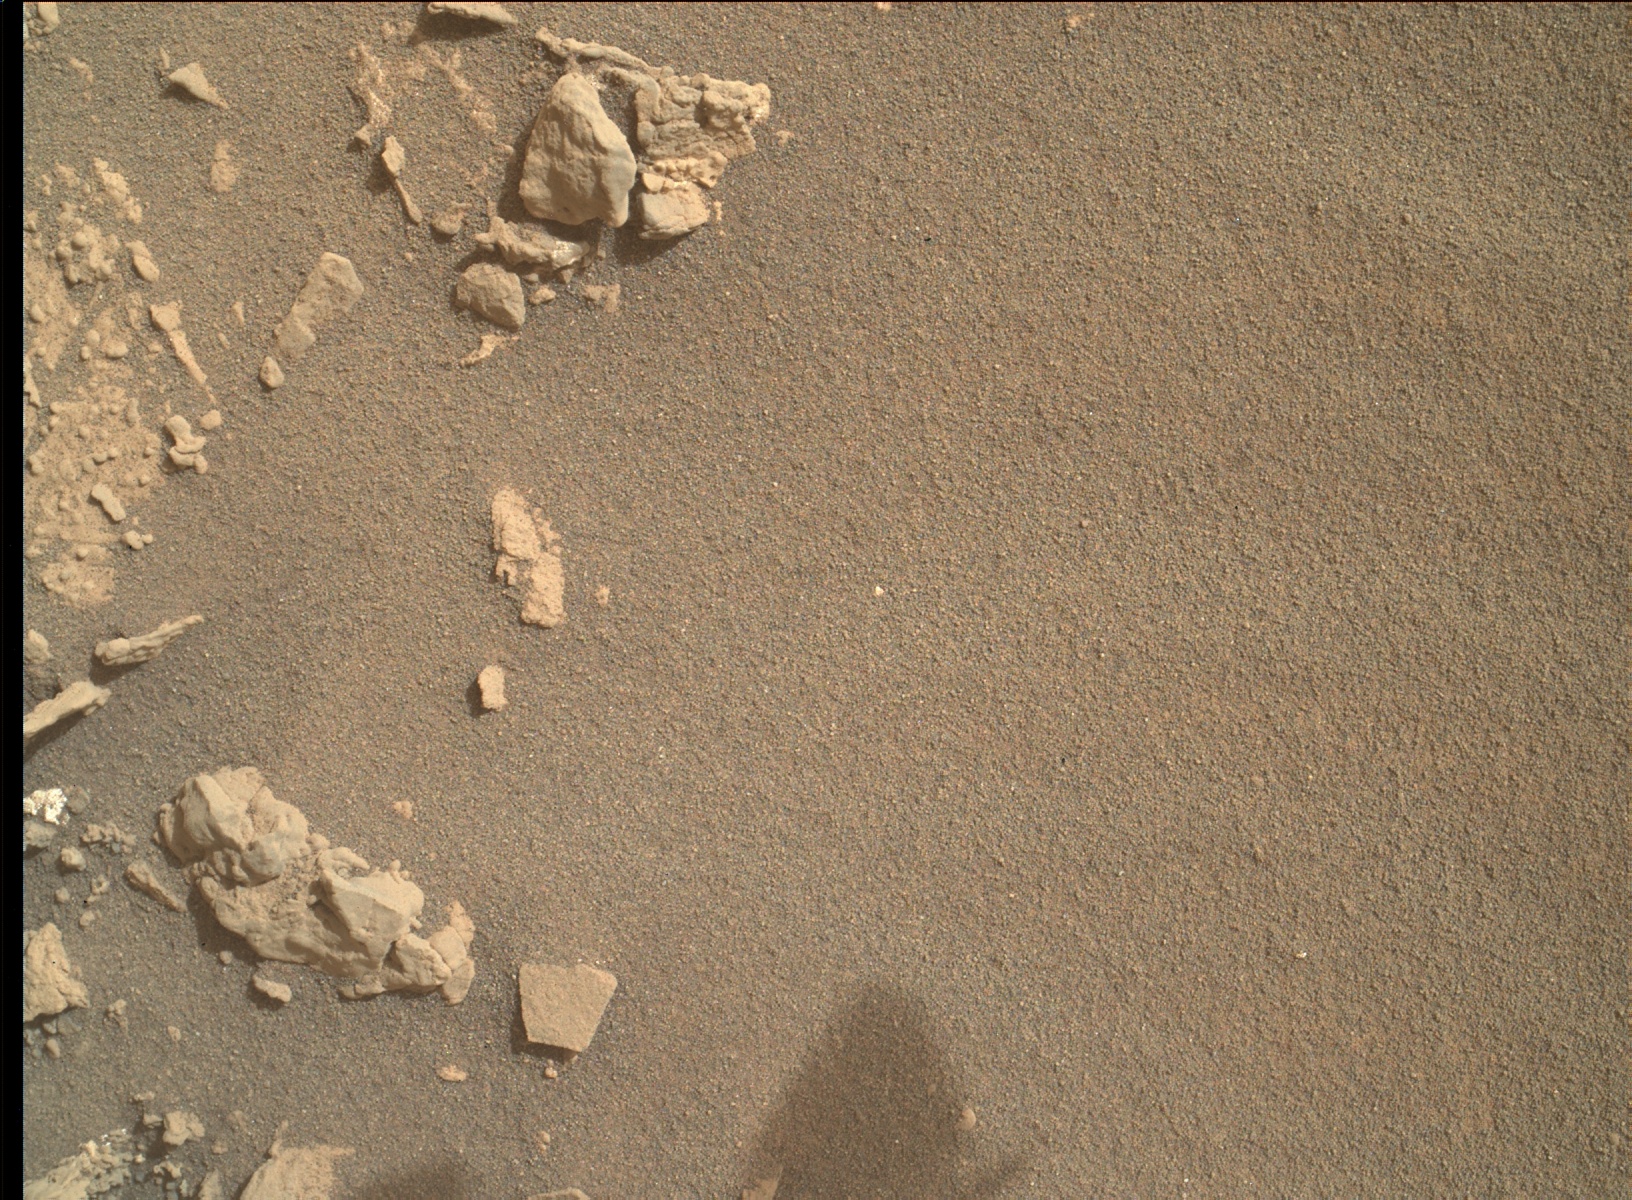 Nasa's Mars rover Curiosity acquired this image using its Mars Hand Lens Imager (MAHLI) on Sol 2667